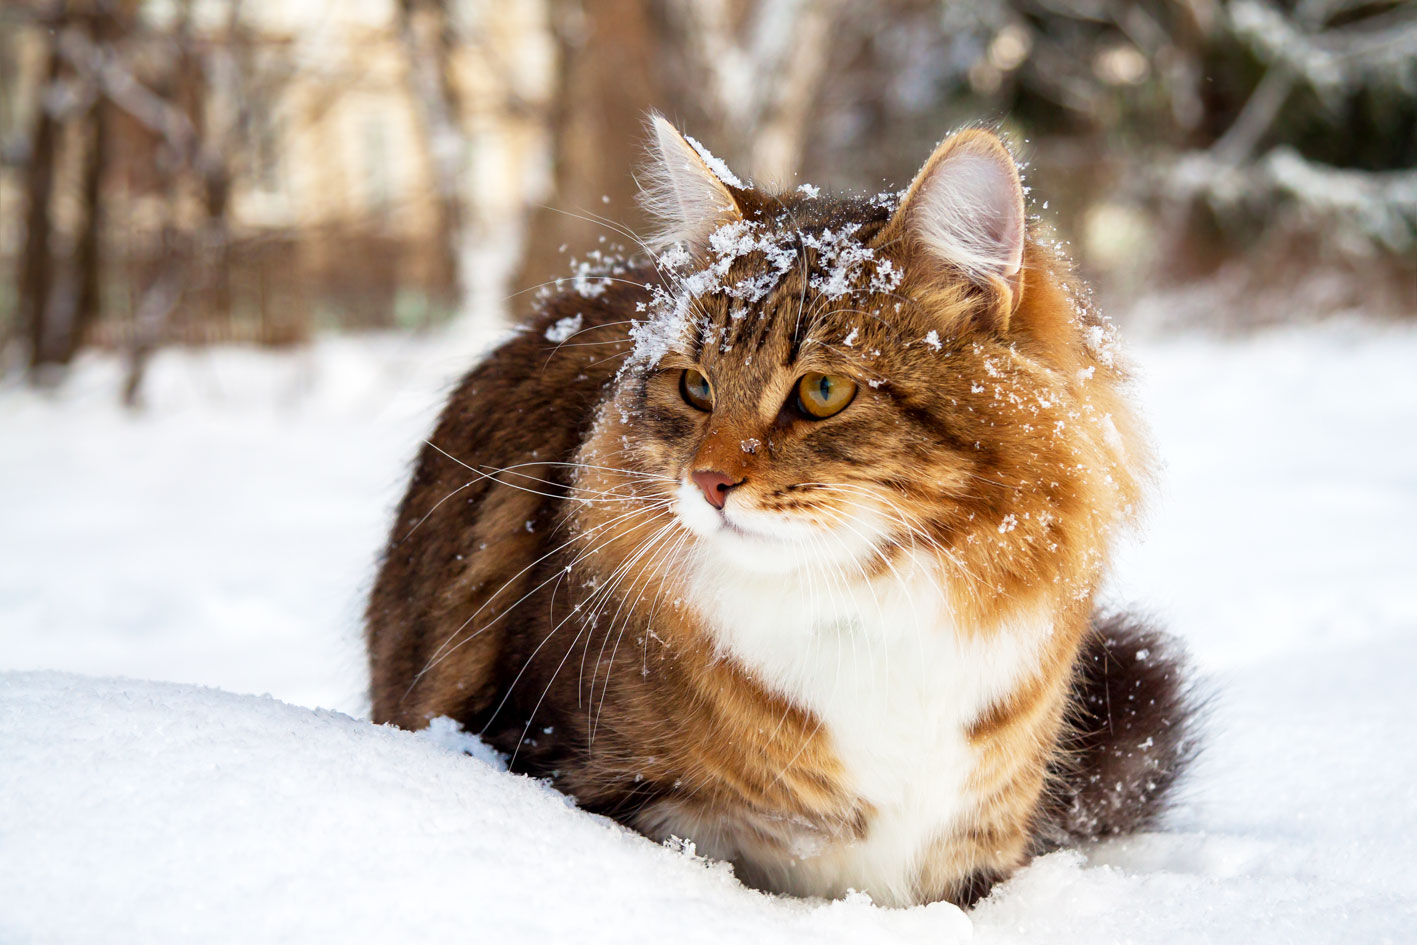 Cats and Cold Weather